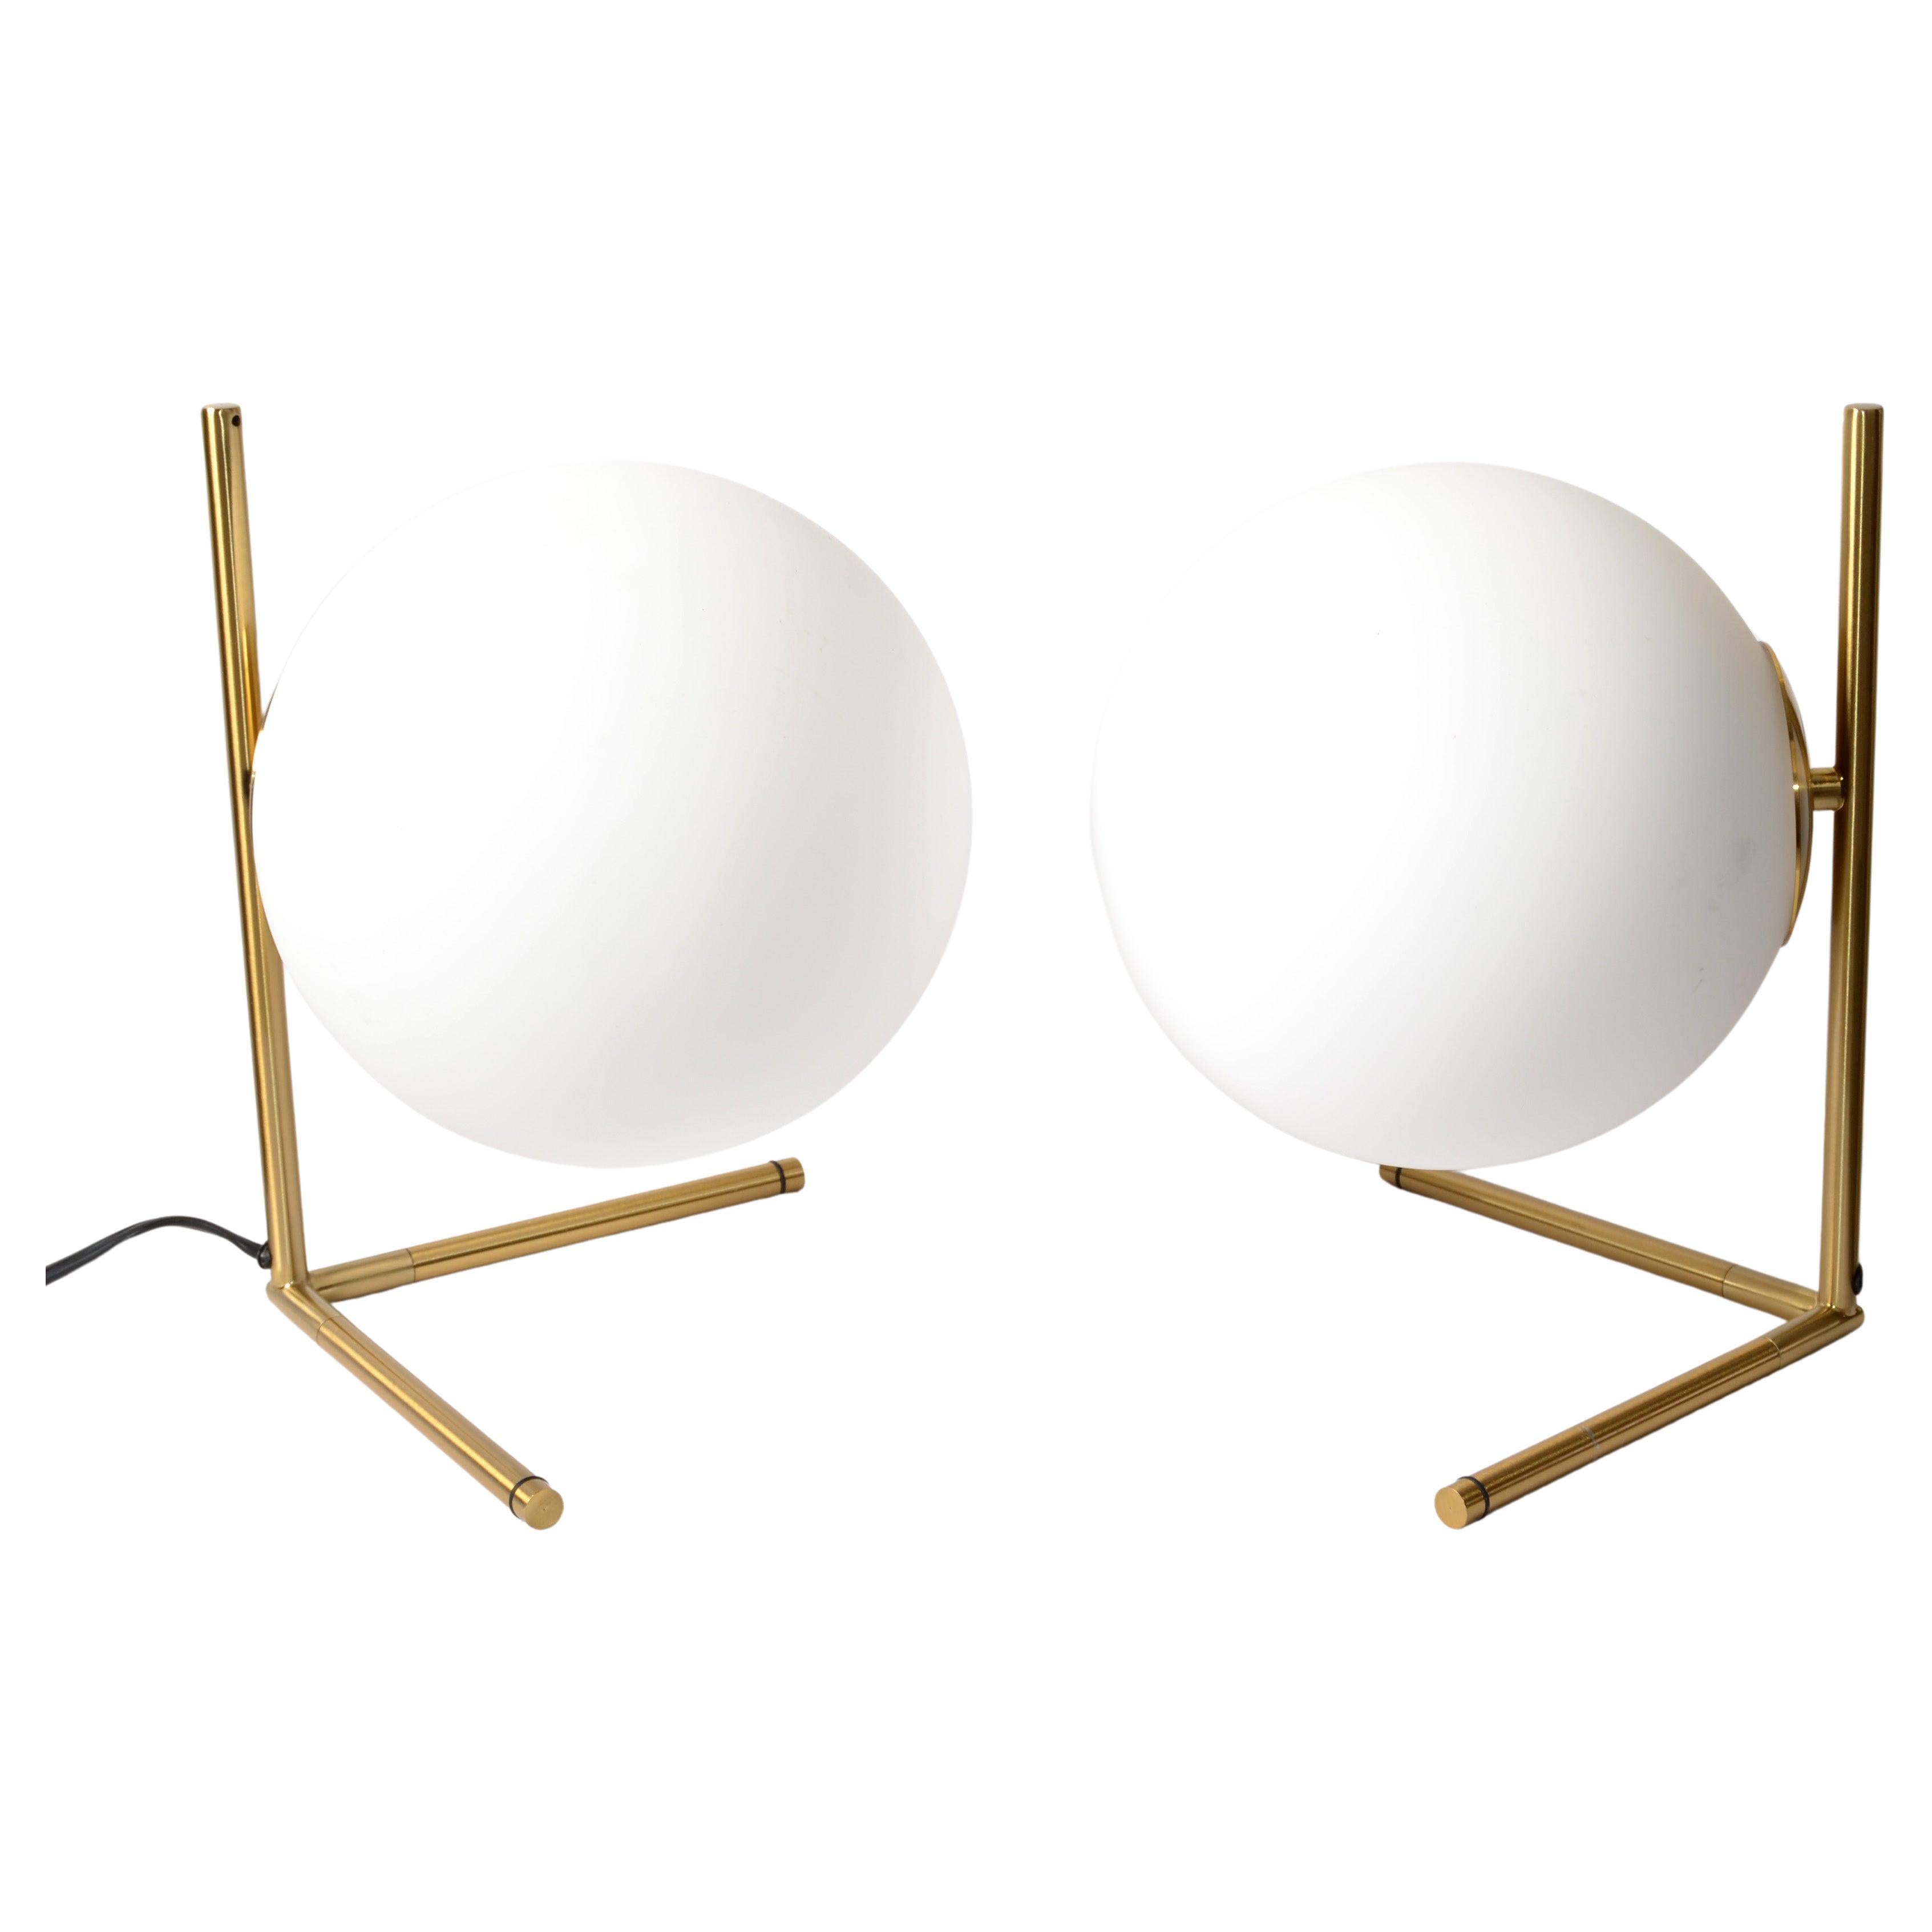 Set 2 Brass Sphere Frosted Globe Glass Table Lamps or Desk Lamps Stilnovo Style In Good Condition For Sale In Miami, FL